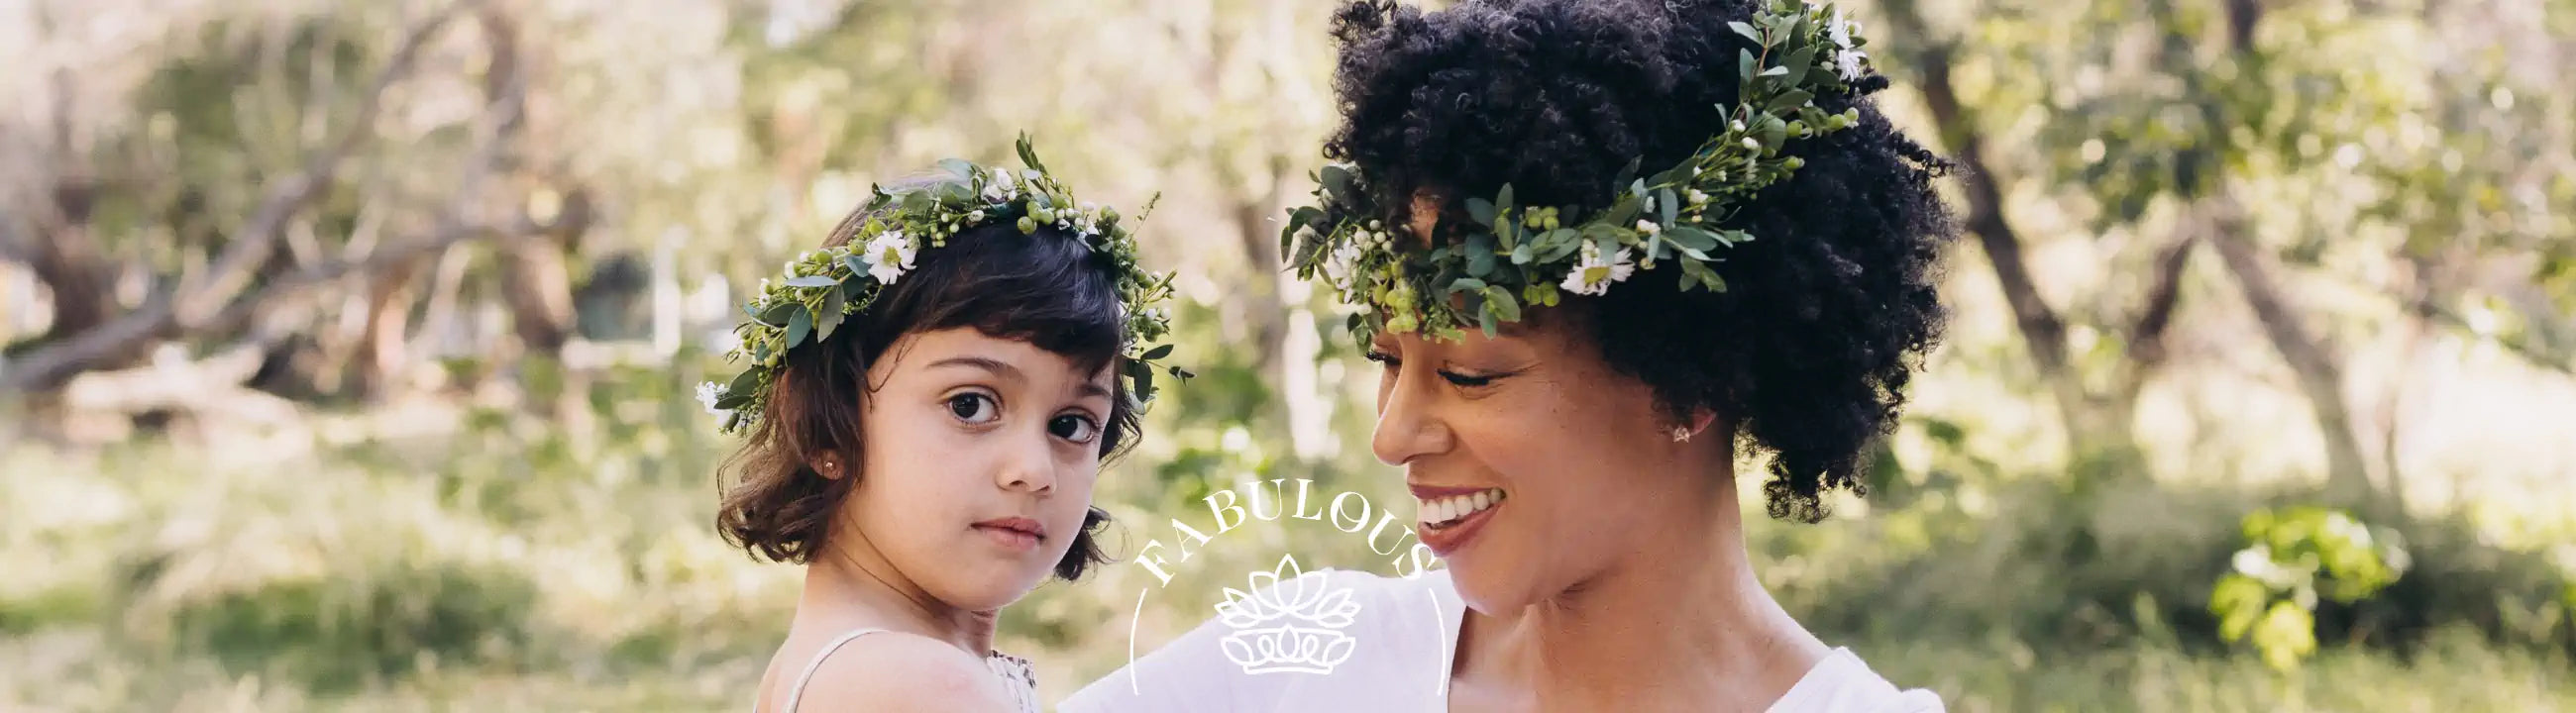 A mother and daughter wearing flower crowns and sharing a joyful moment in a lush garden. Fabulous Flowers and Gifts.